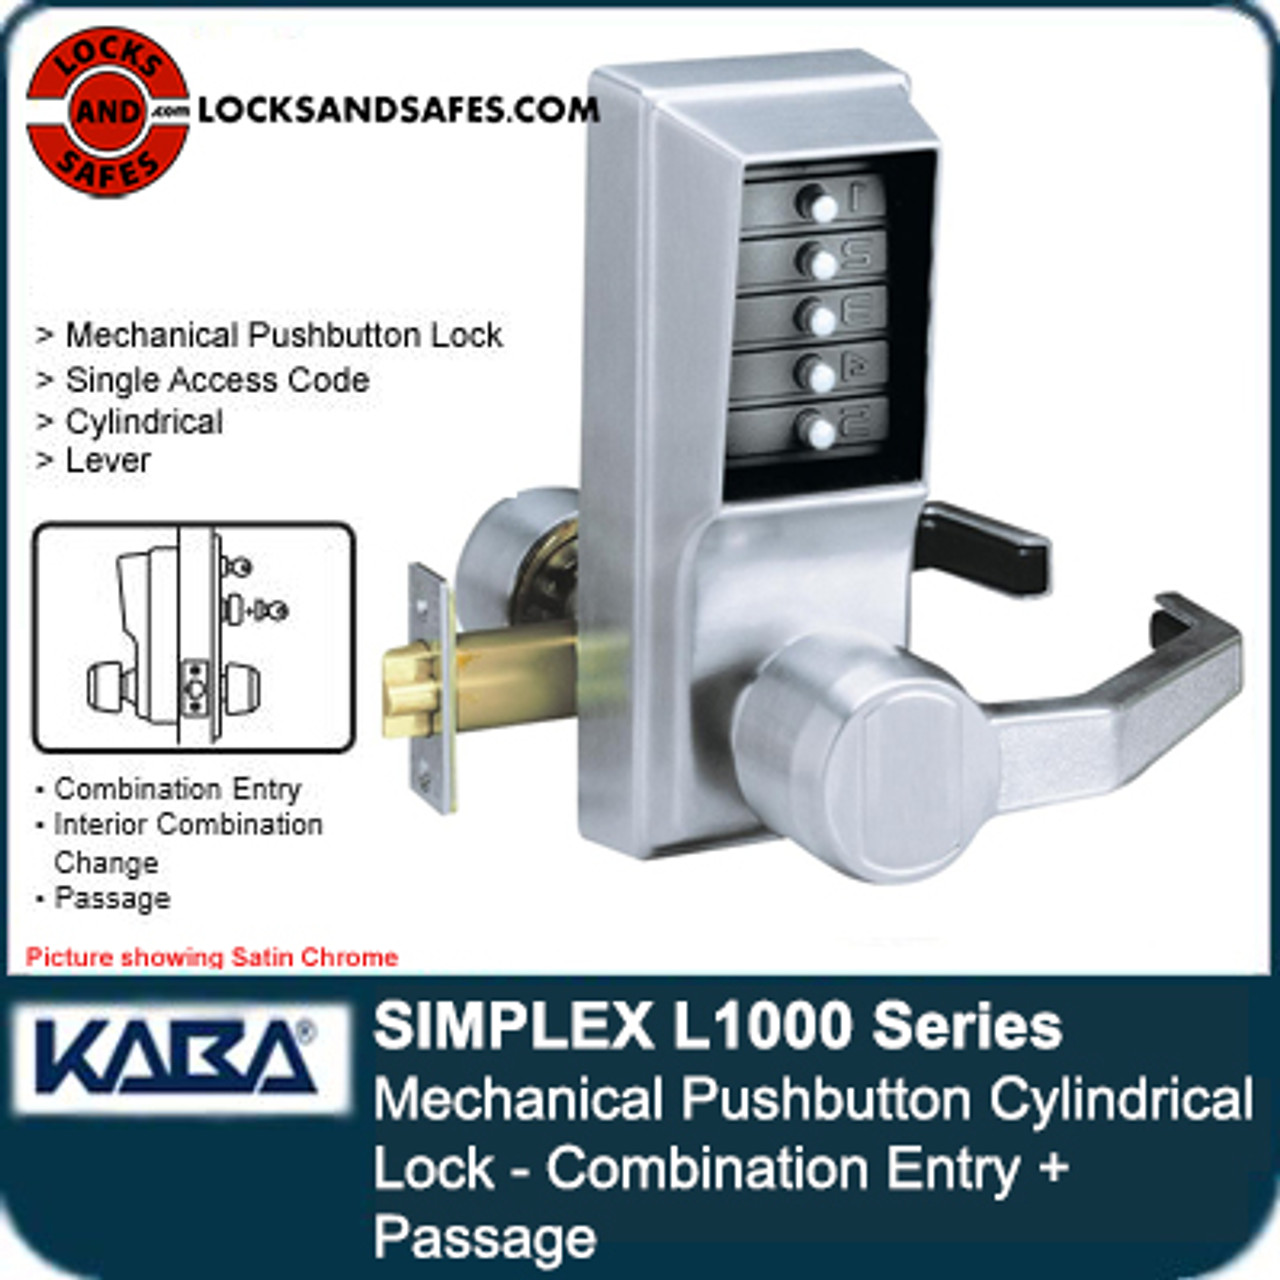 Pushbutton Lock that can be left unlocked Simplex L1000